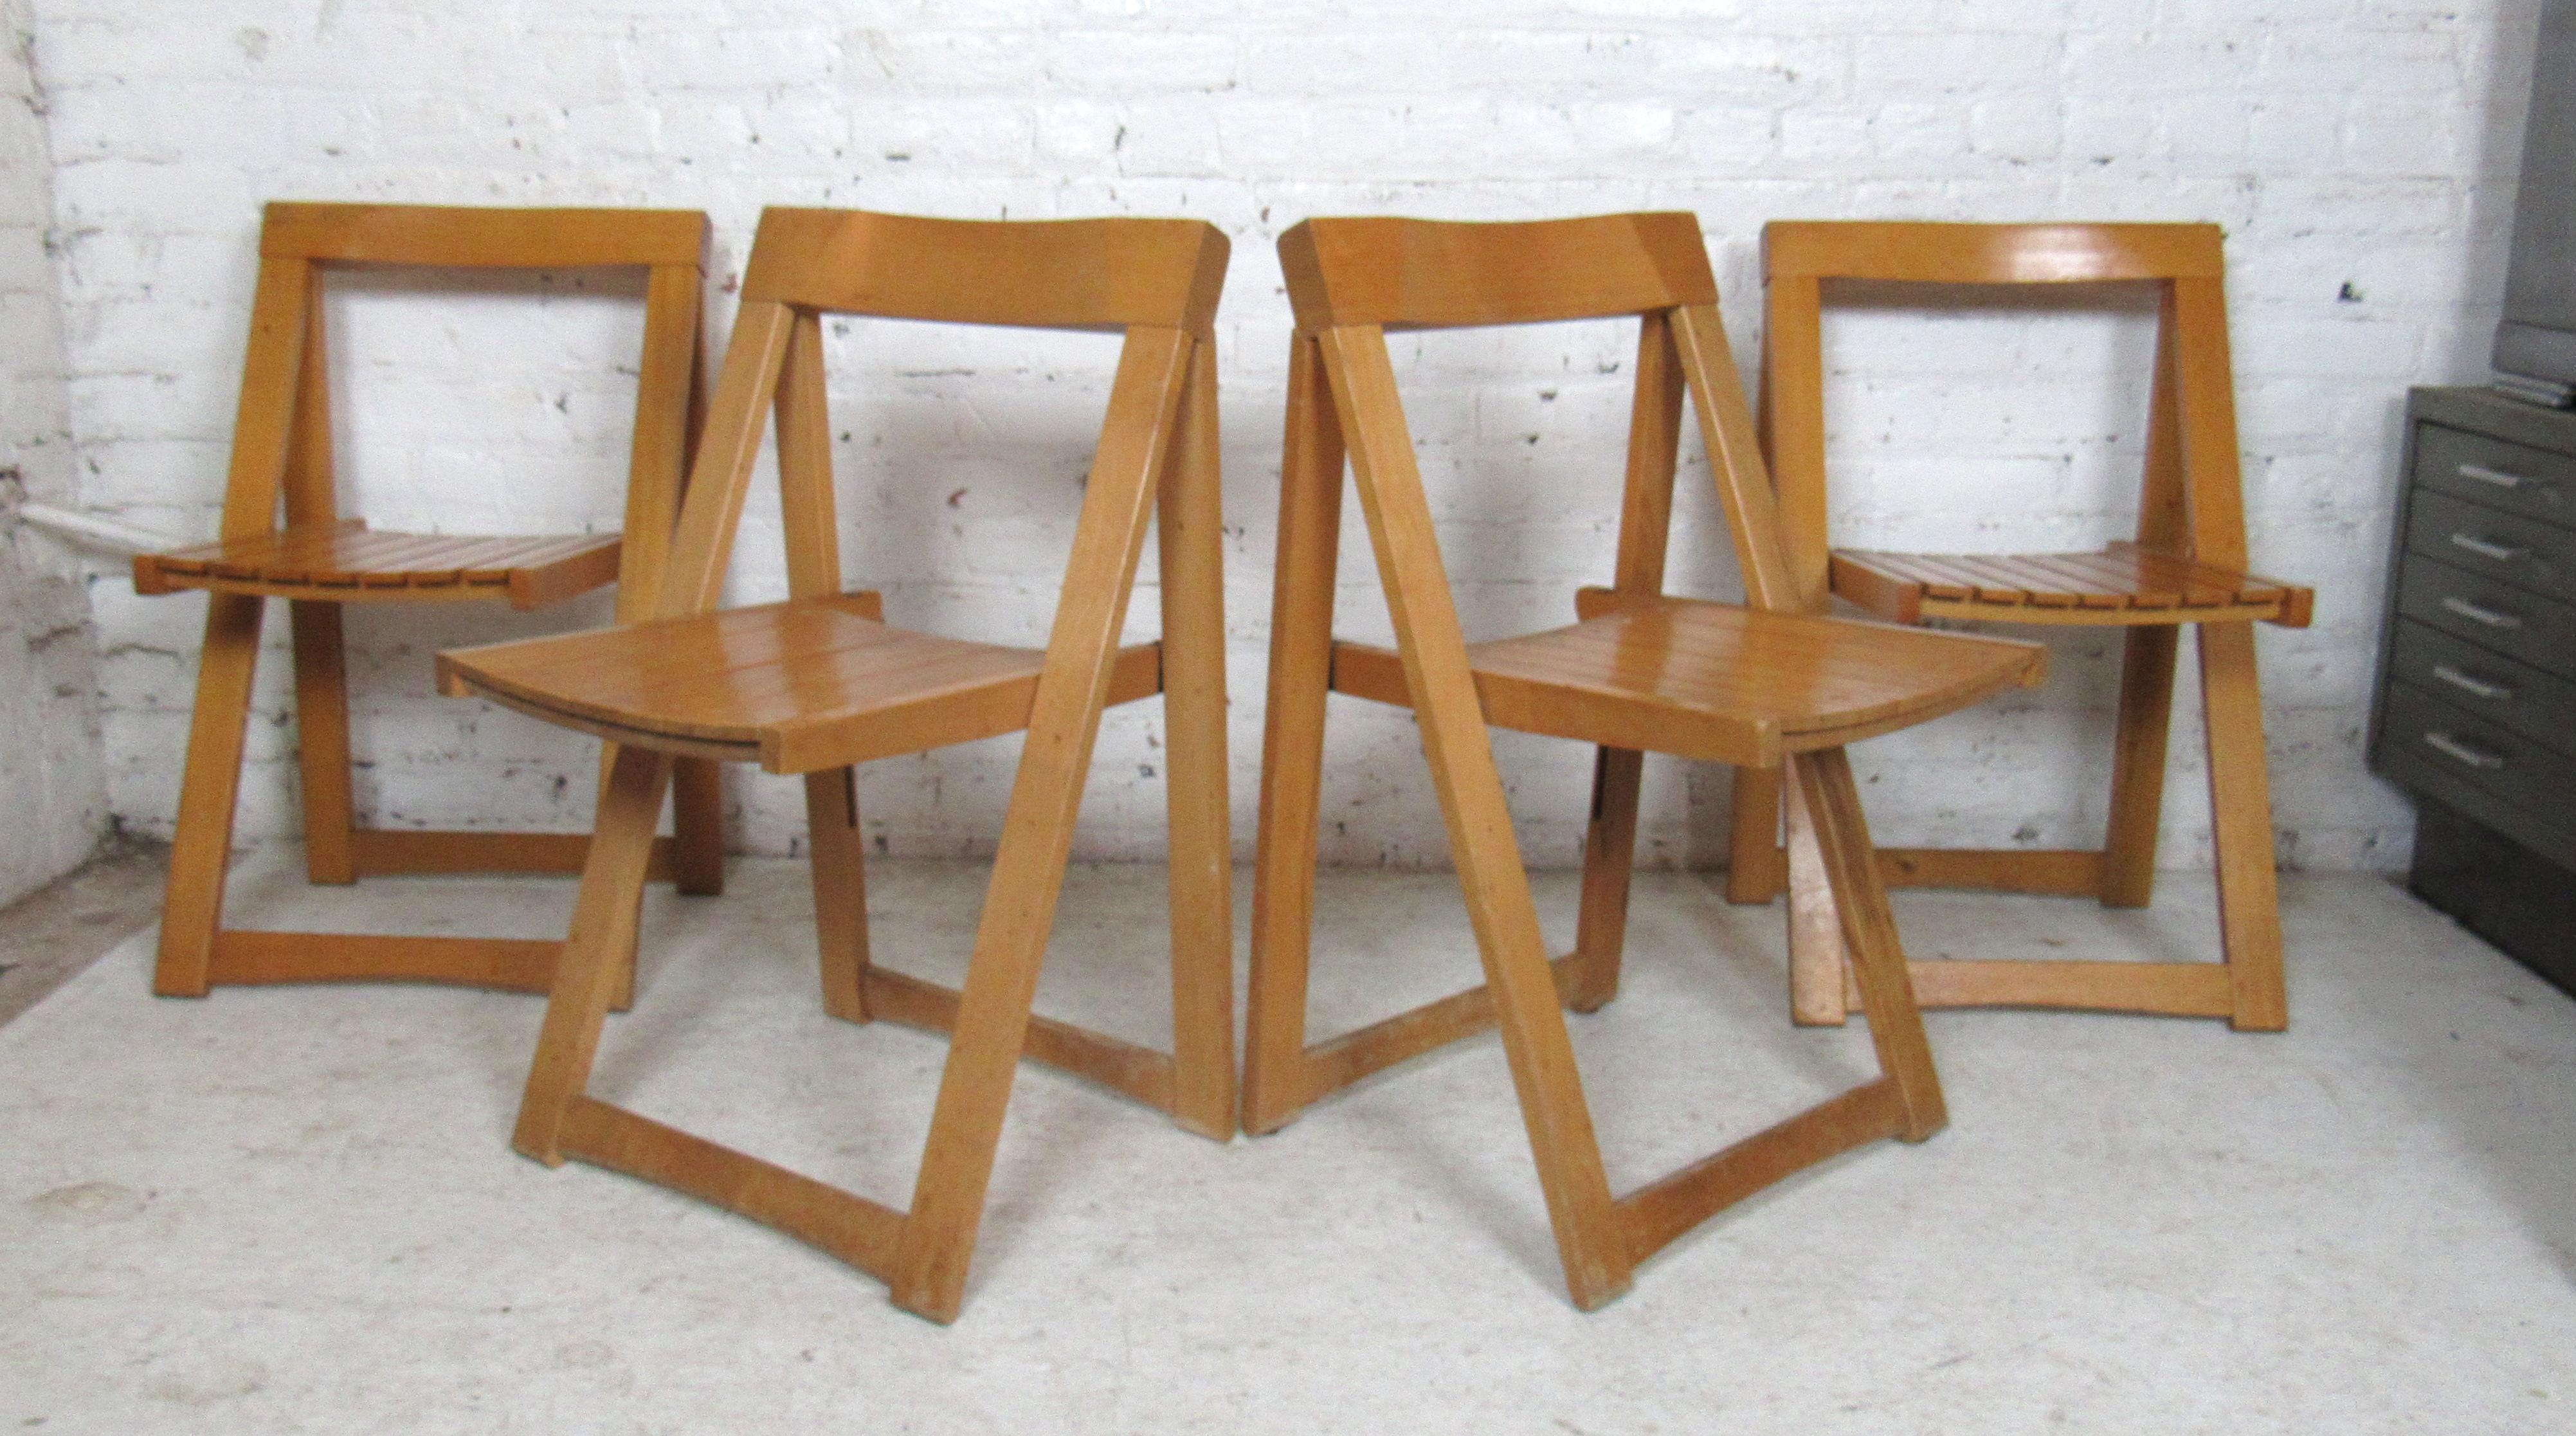 Mid-Century Modern wood folding chairs. Chairs fold for easy storage.
(Please confirm item location - NY or NJ - with dealer).
 